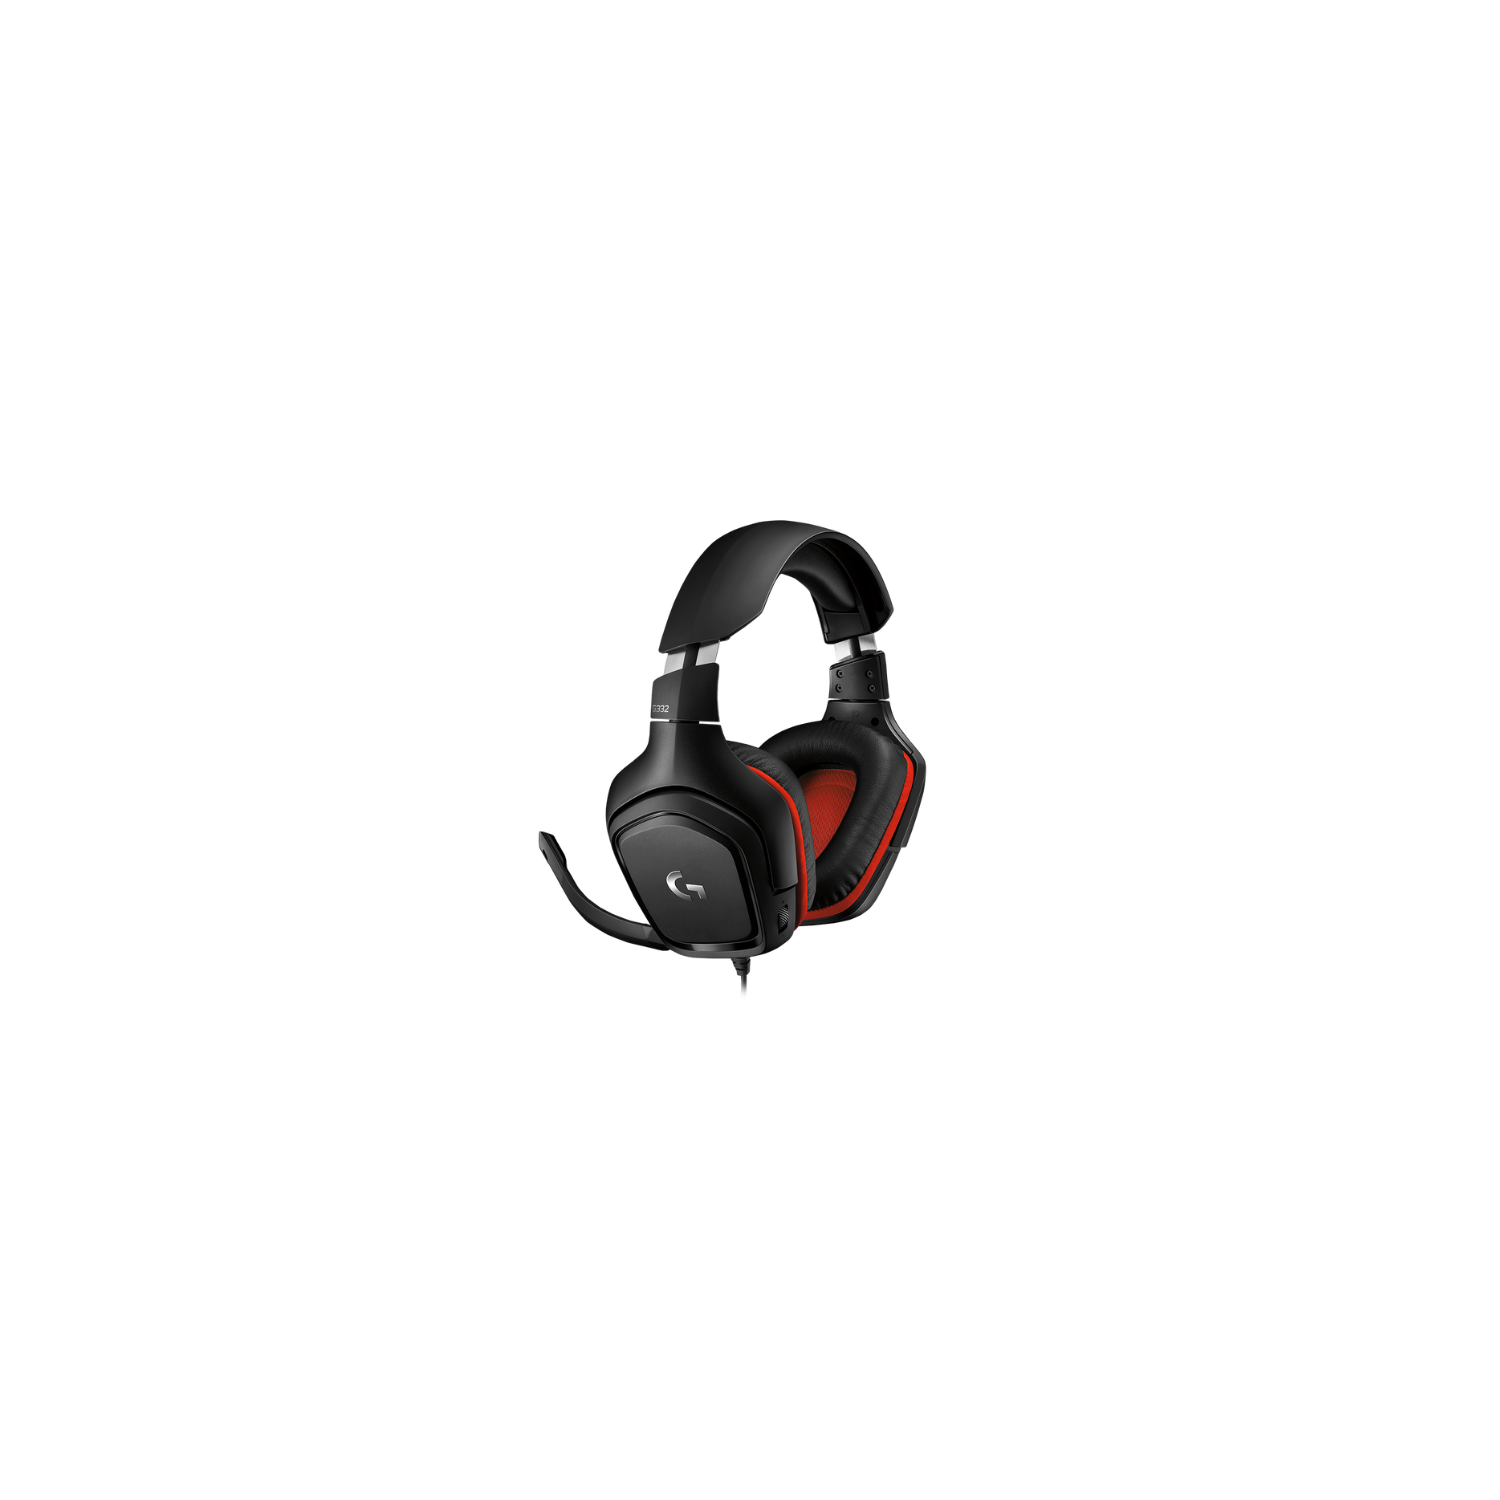 Logitech G332 Stereo Gaming Headset for PC, PS4, Xbox One, Nintendo Switch with 2 years warranty included (981-000755) - Brand New